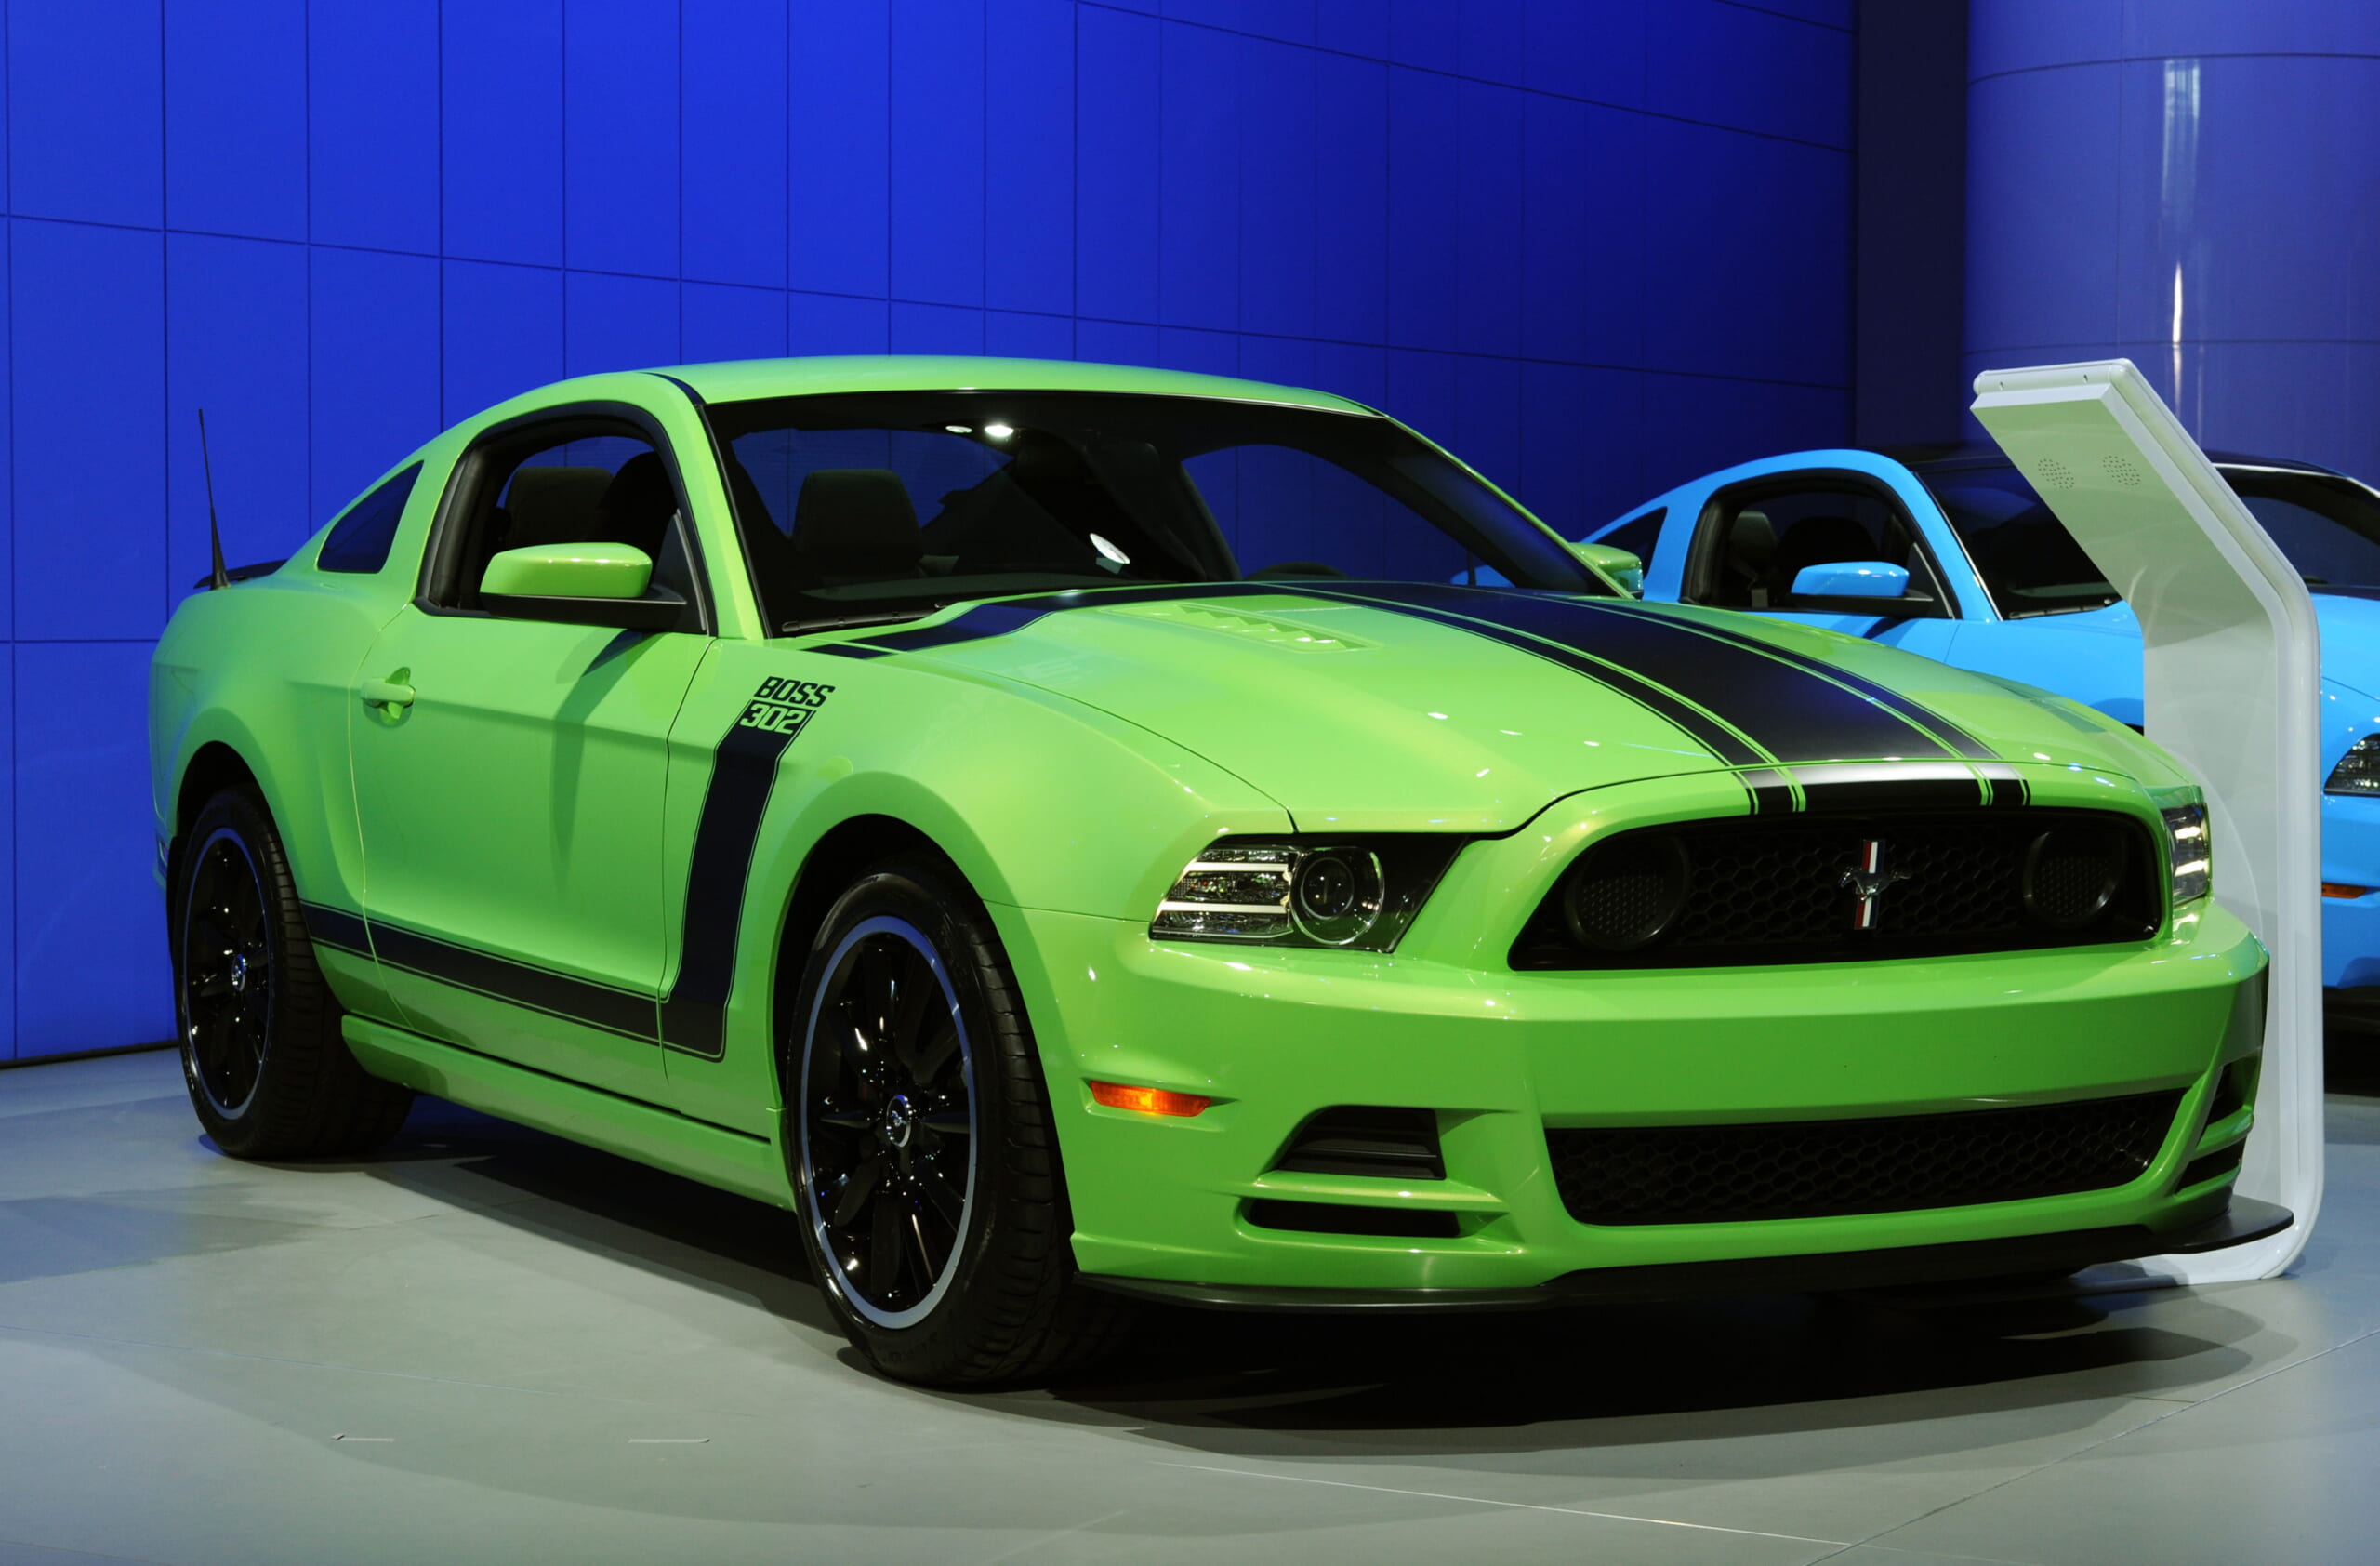 2013 Ford Mustang Boss 302 Got-To-Have-It Green